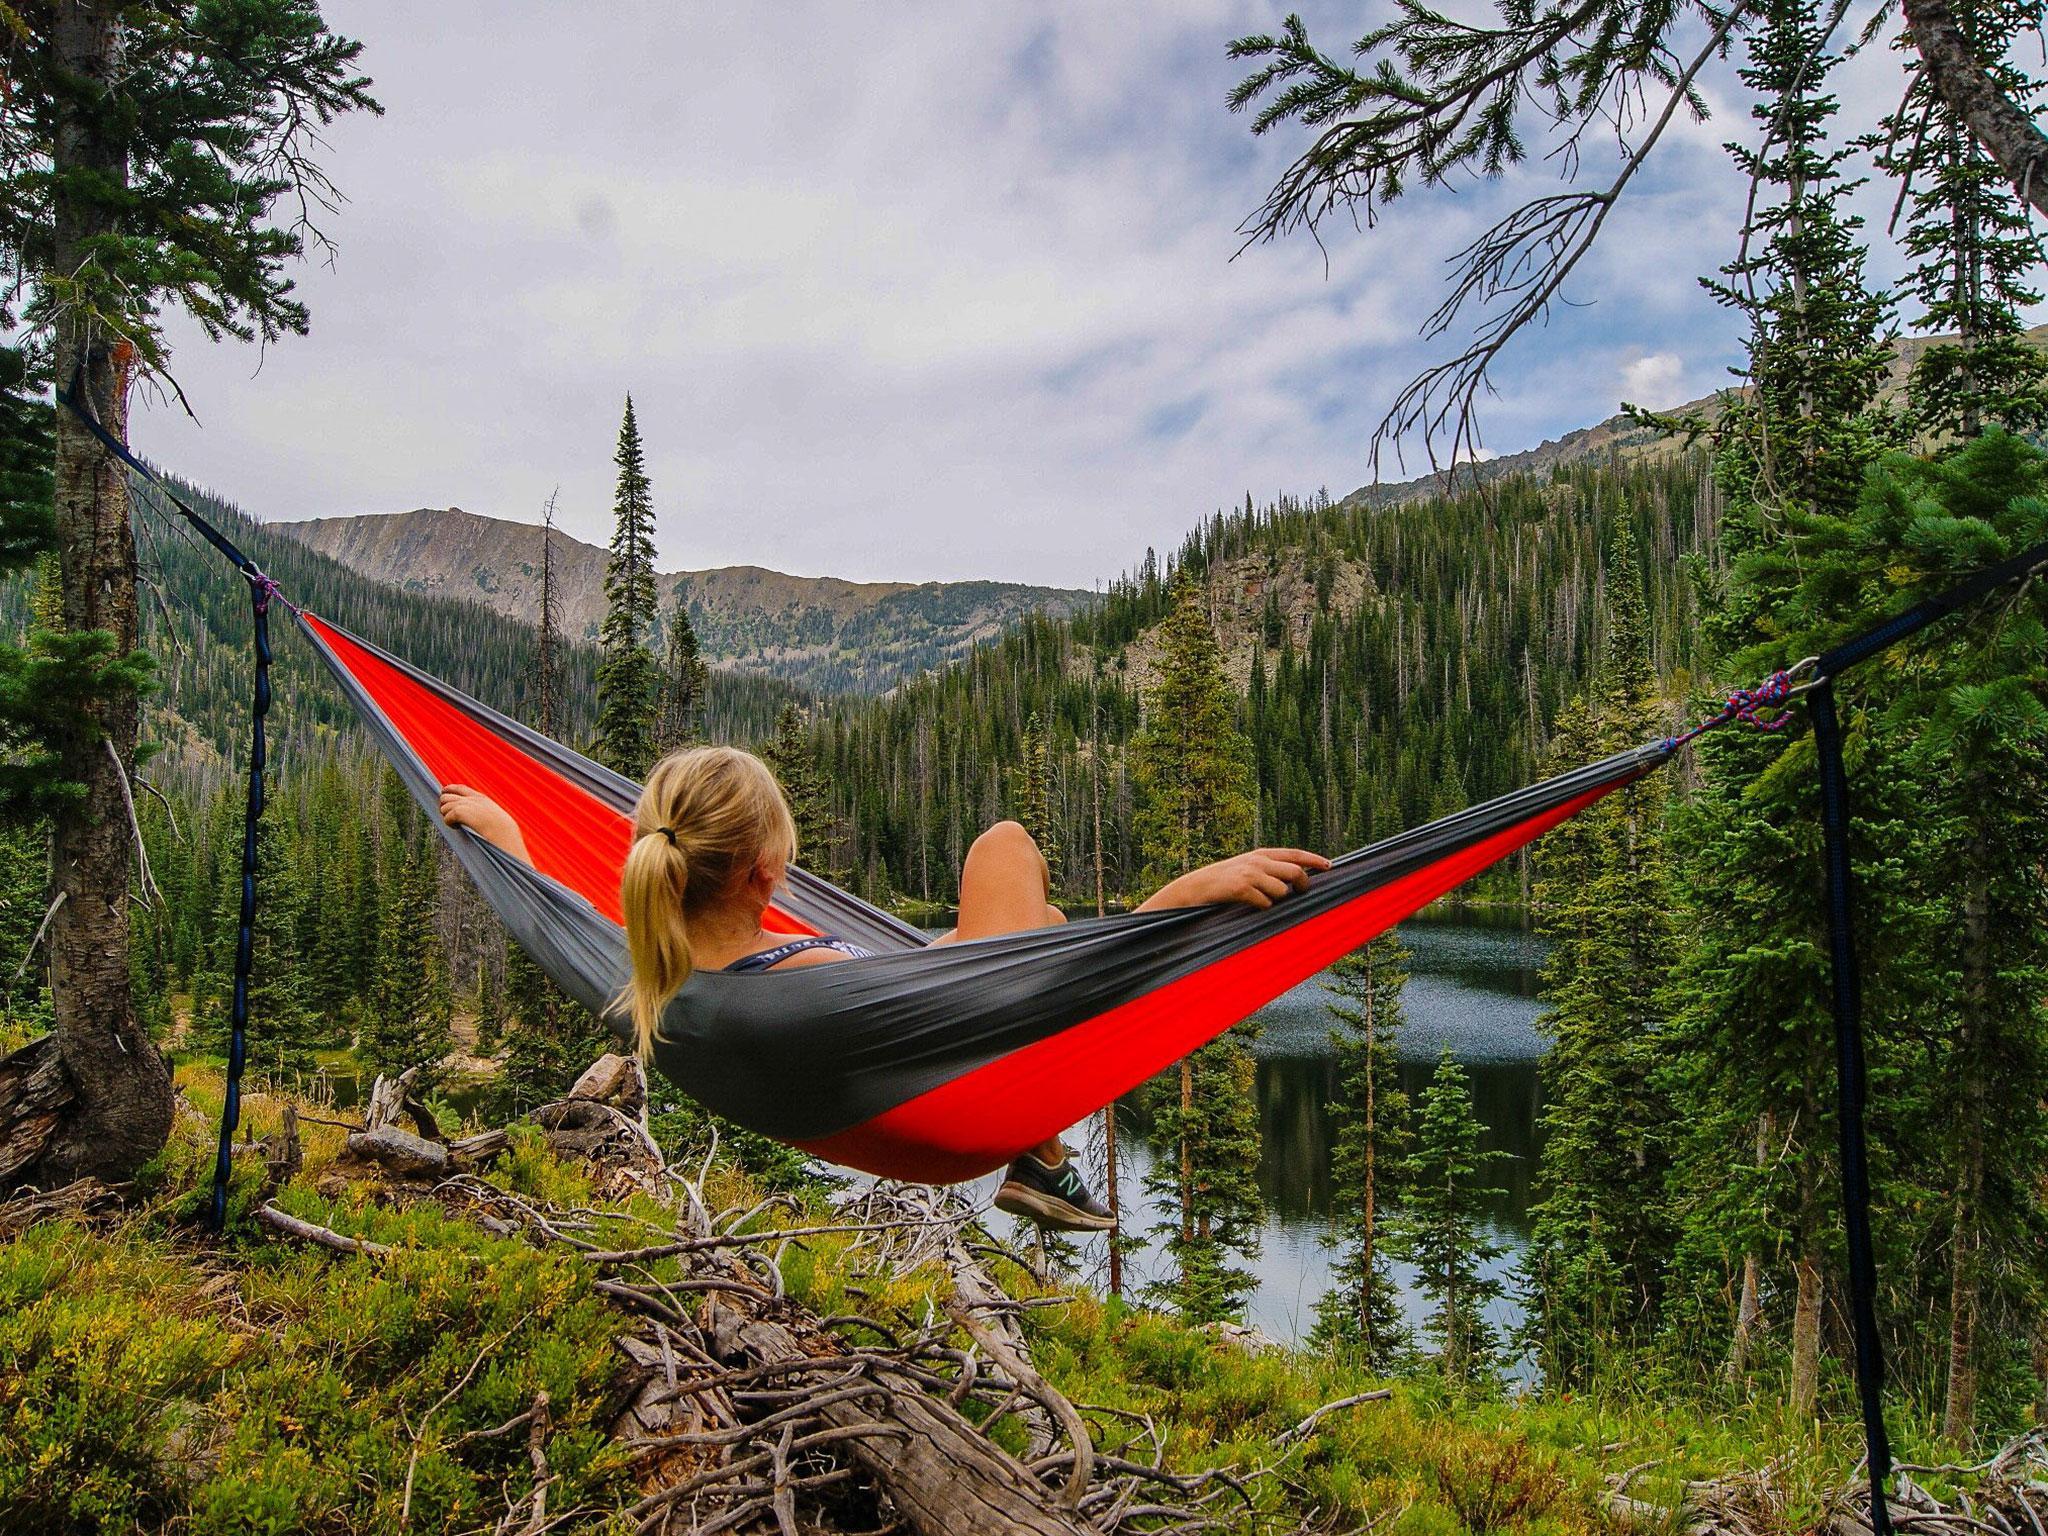 Stock image of girl backpacking used for the 'wanderingggirl' Instagram account